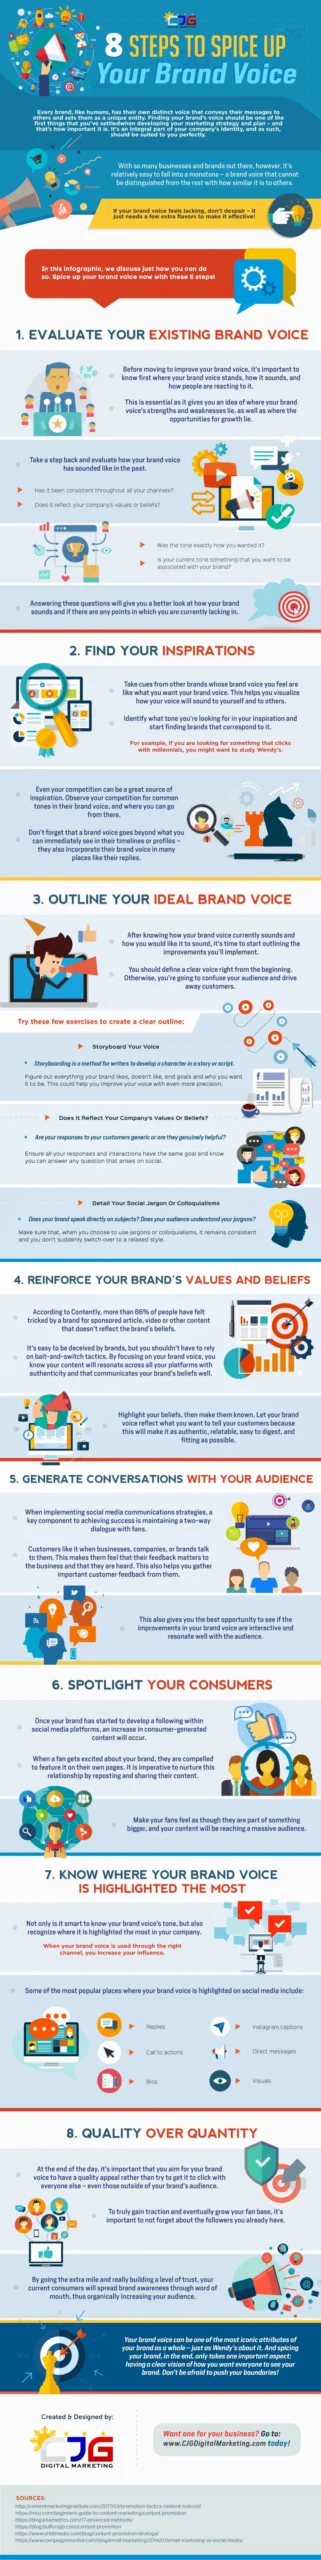 8 Steps To Spice Up Your Brand’s Voice (Infographic)